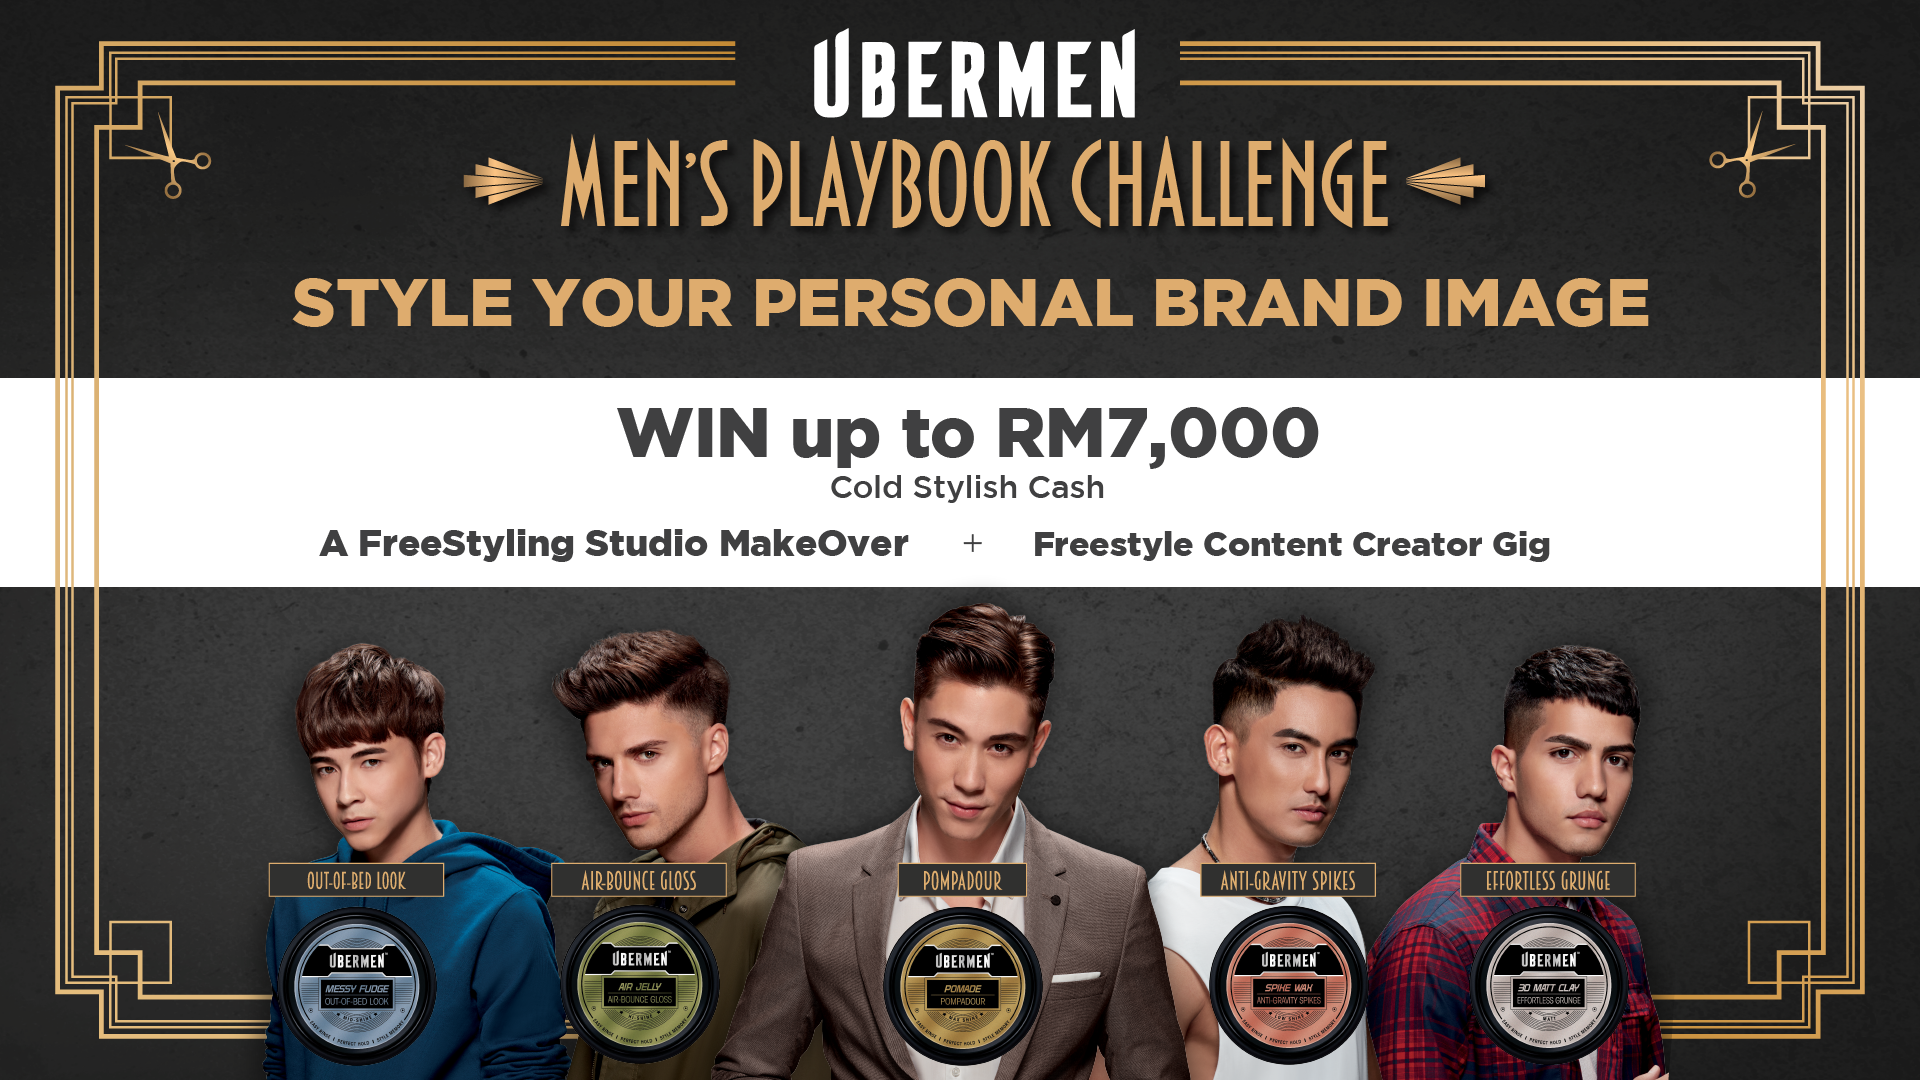 If you like your new Look, you can join the Men’s PlayBook Challenge 2022 & Win up to RM 7,000 Cash.